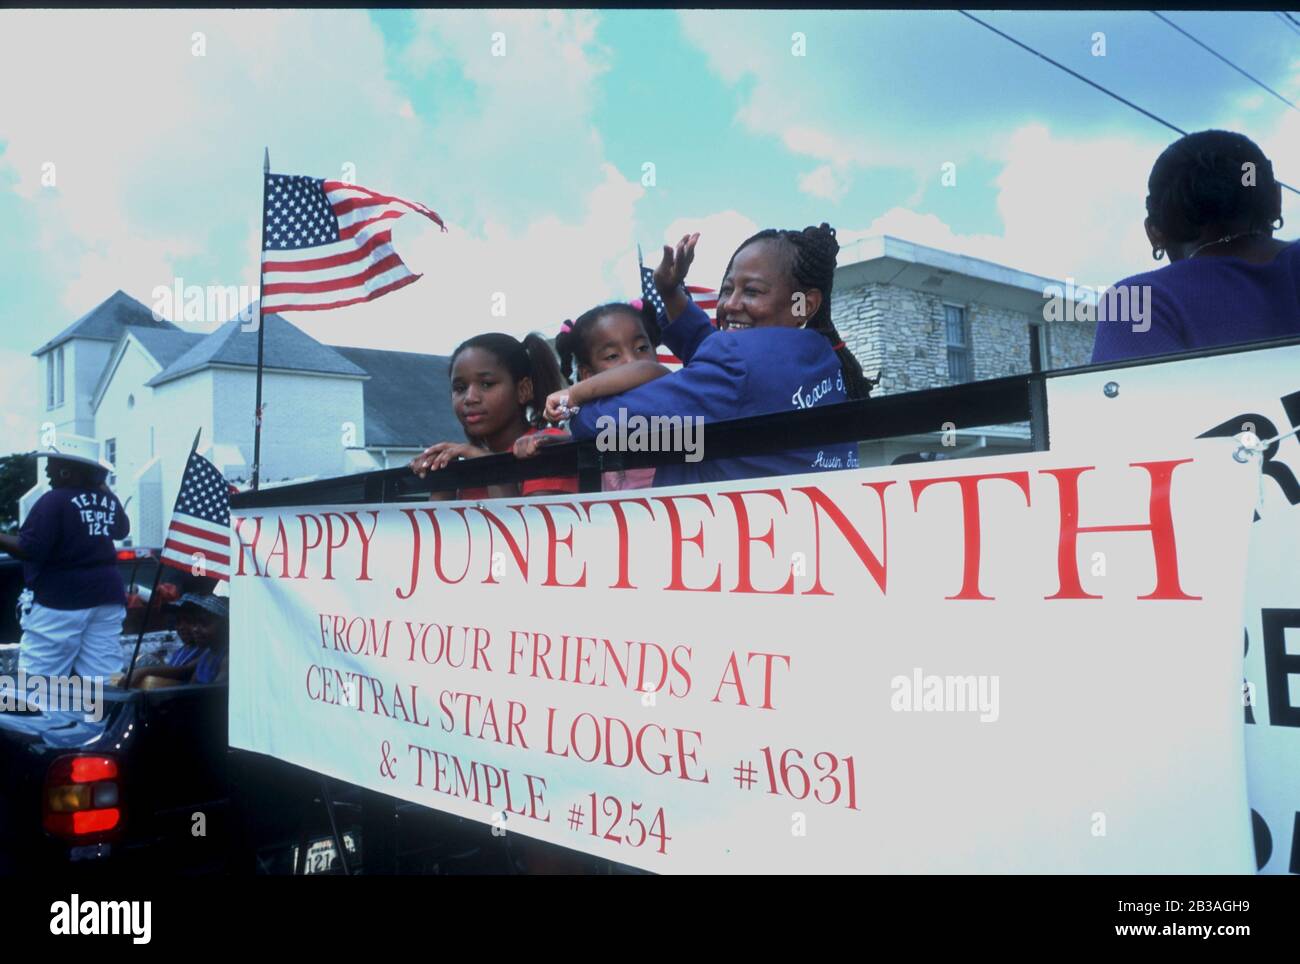 Austin, Texas USA,19 JUN 2002: Black children and woman wave to spectators lining the street as they ride on a float in the annual Juneteenth parade through the streets of historically black east Austin. ©Bob Daemmrich Stock Photo